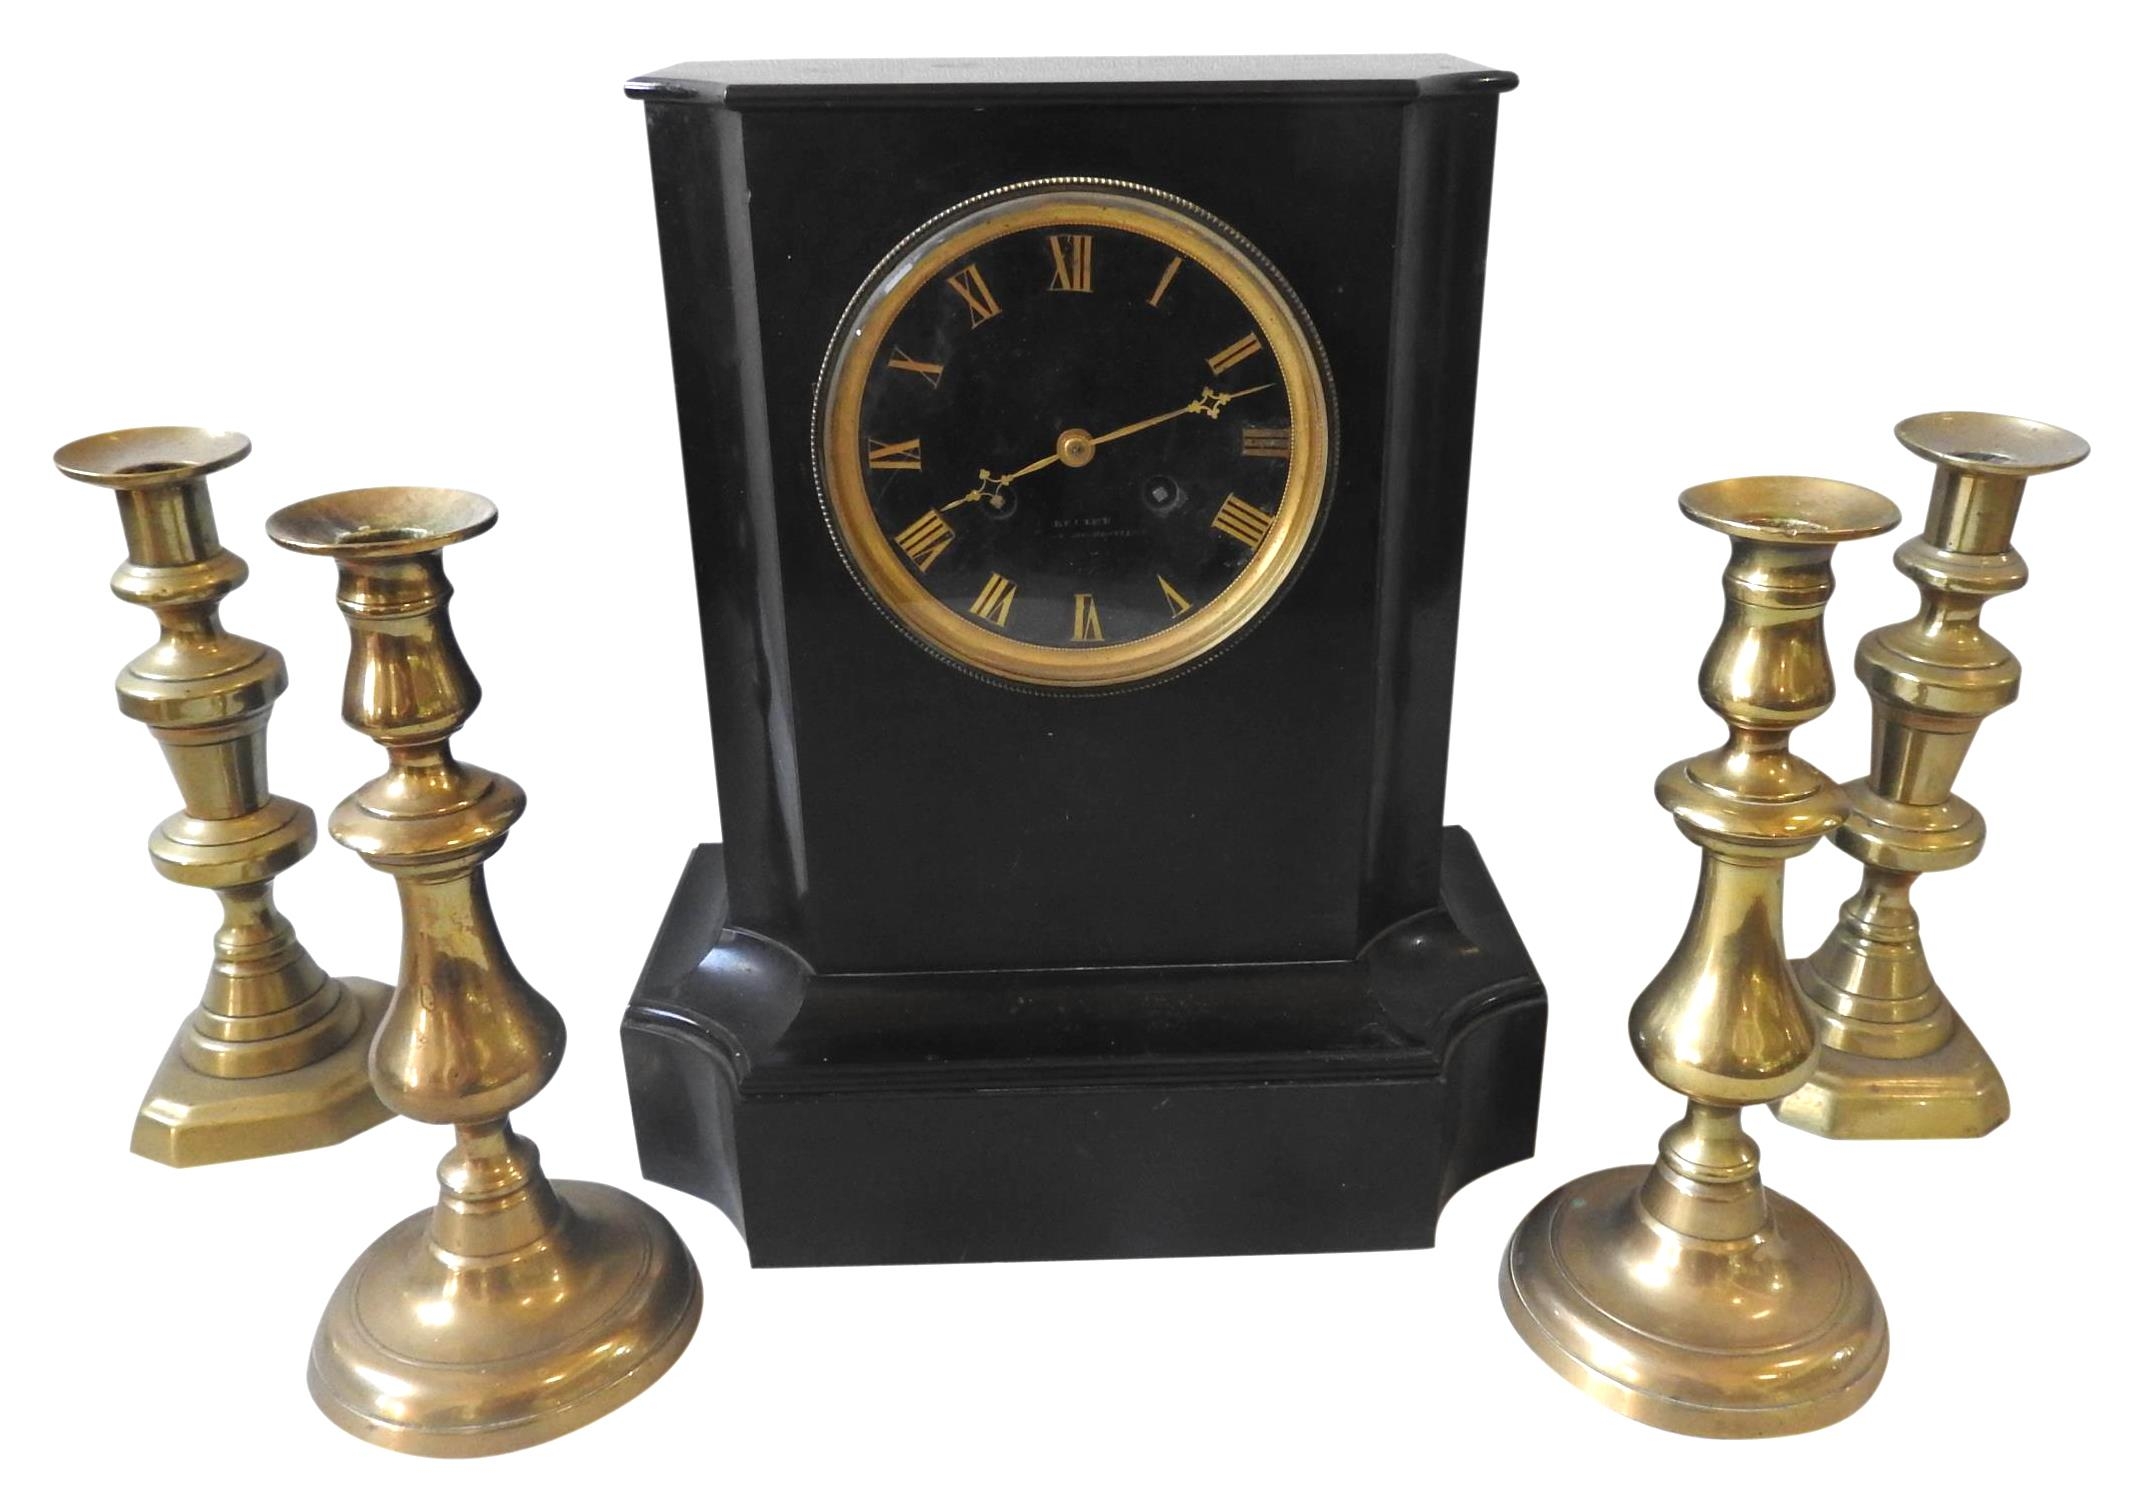 A 19TH CENTURY SLATE MANTEL CLOCK, the case with canted corners, the black dial with brass